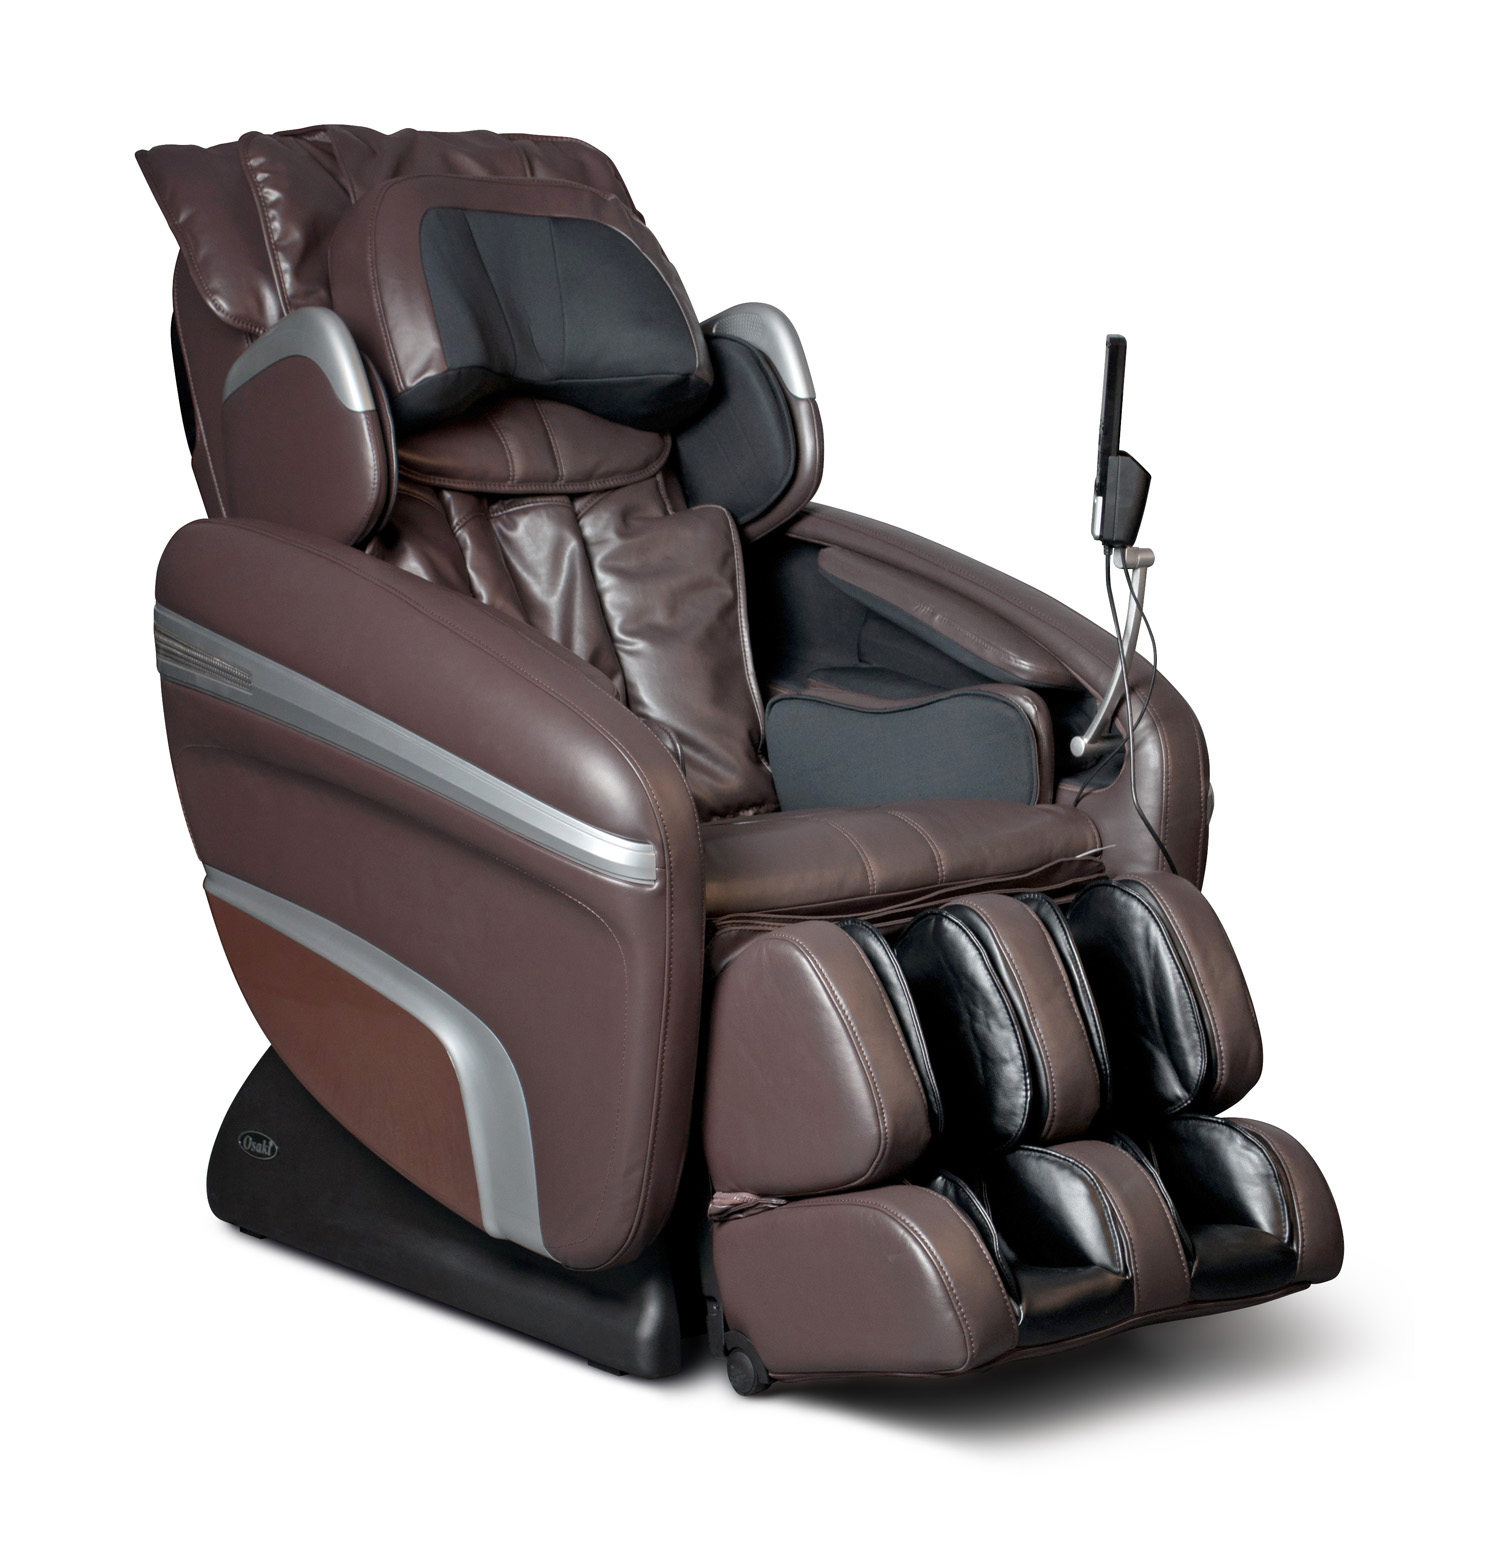 Massage-chair-relief.com Introduces The Osaki OS-6000 Massage Chair to